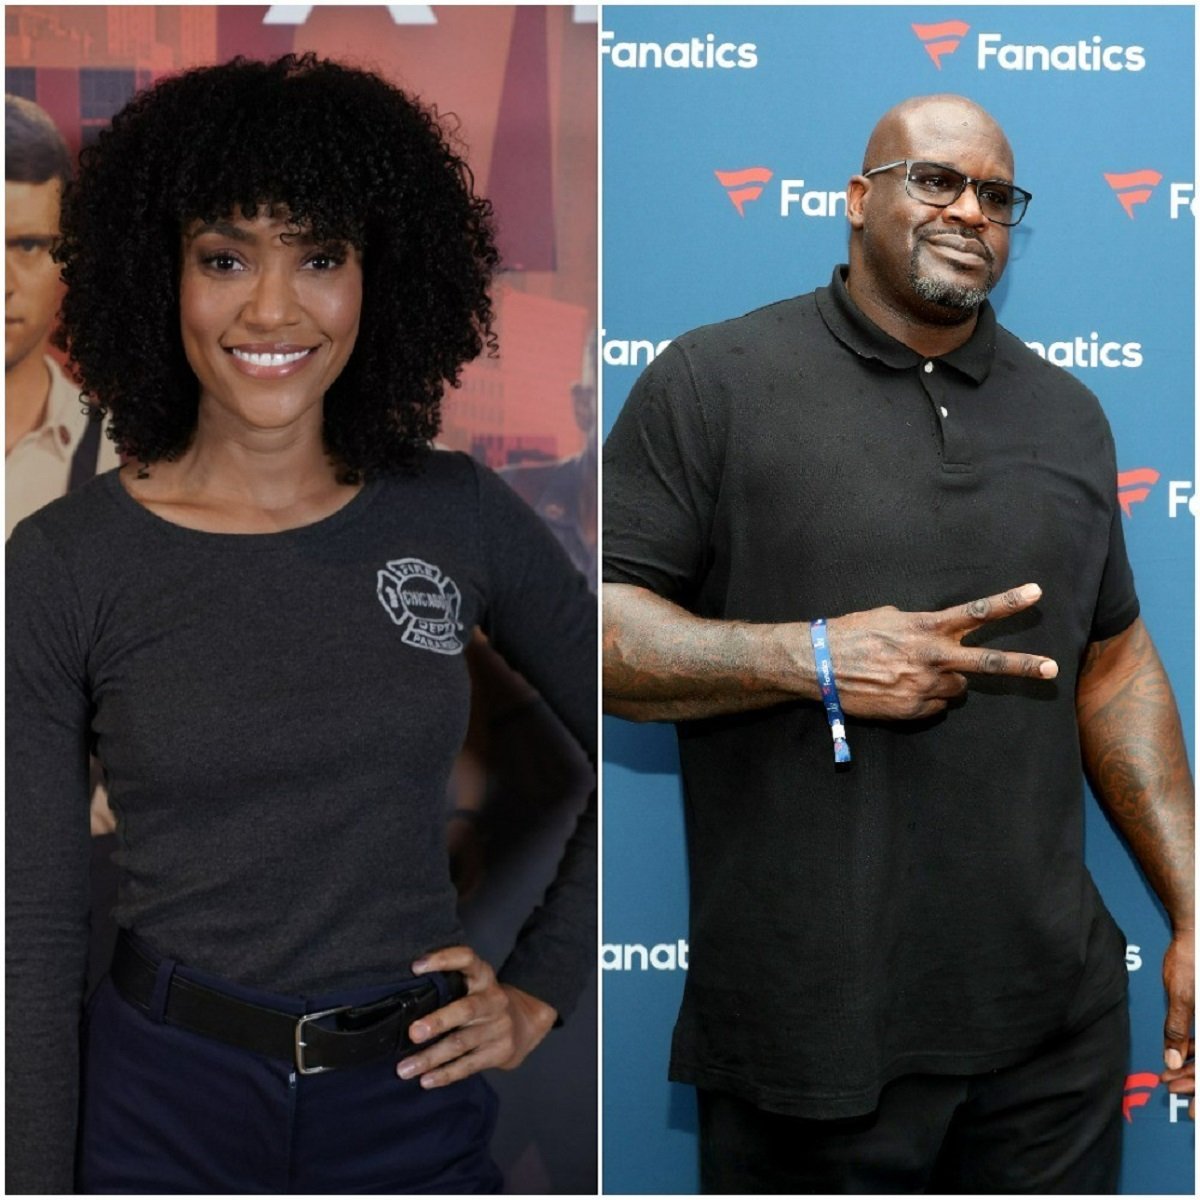 (L): Annie Ilonzeh pictured at "One Chicago Day," (R): Shaquille O'Neal giving the peace sign at Fanatics Super Bowl Party